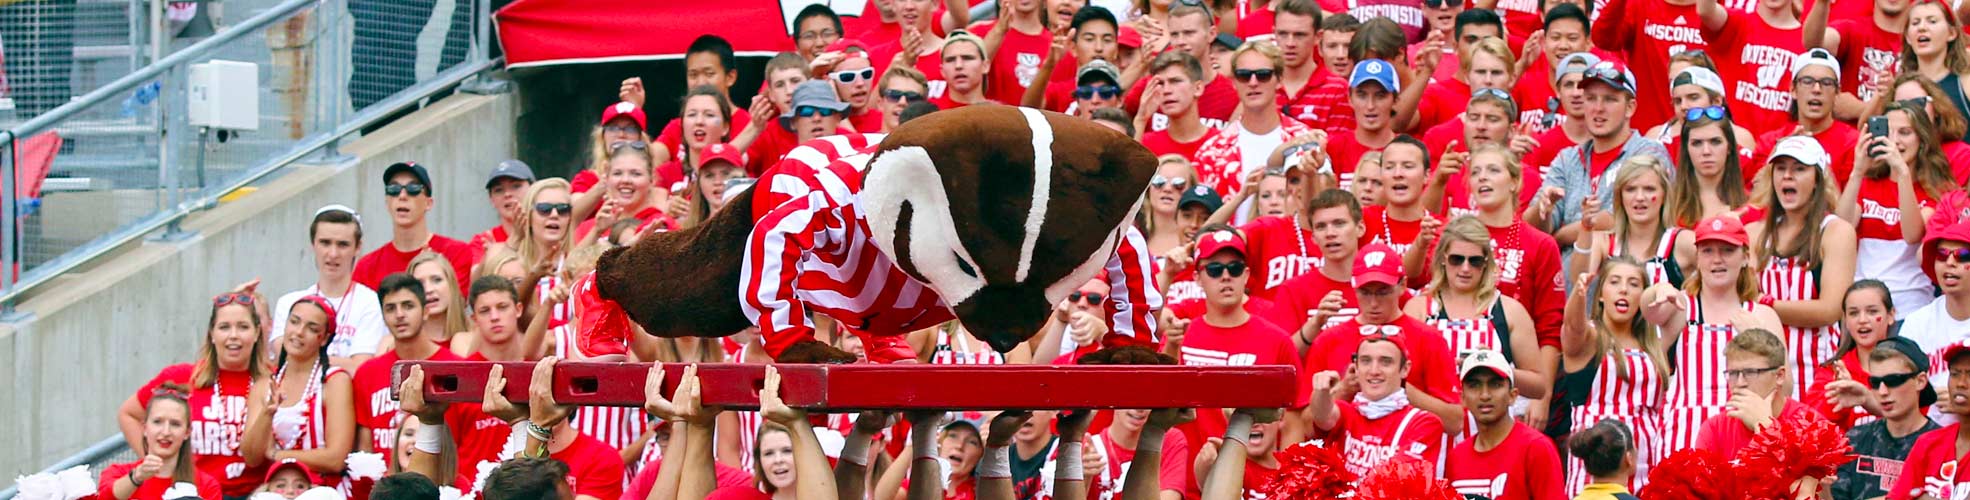 Bucky Doing Pushups At Camp Randall During a Football Game